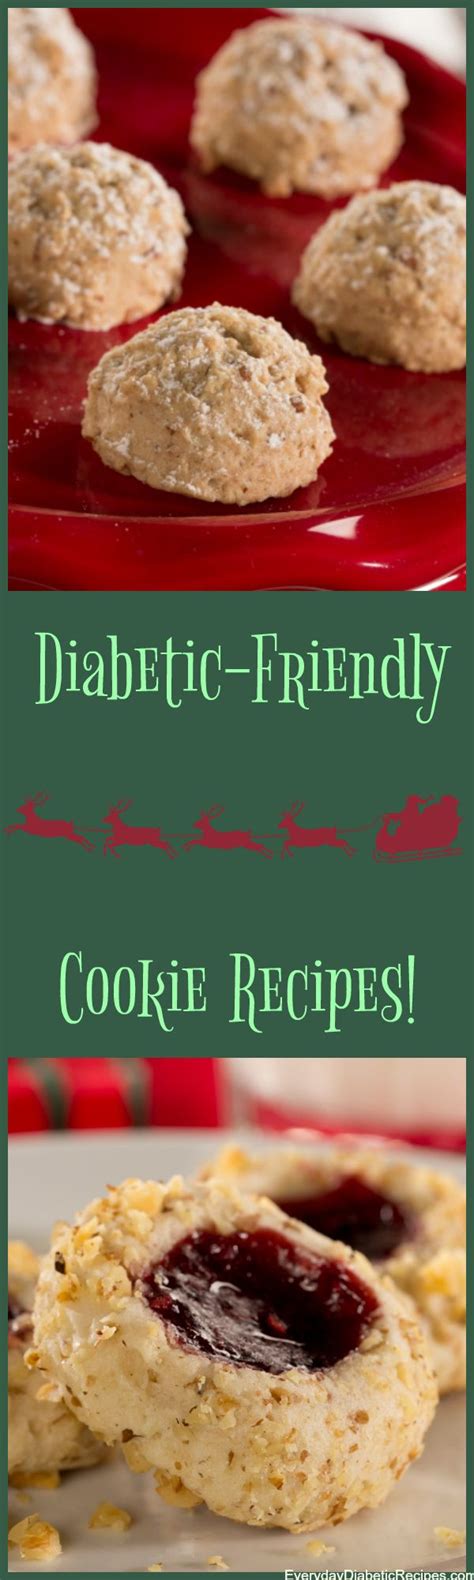 1 g saturated fat, 0 g trans fat cholesterol. The Best Ideas for Diabetic Christmas Cookies - Most Popular Ideas of All Time